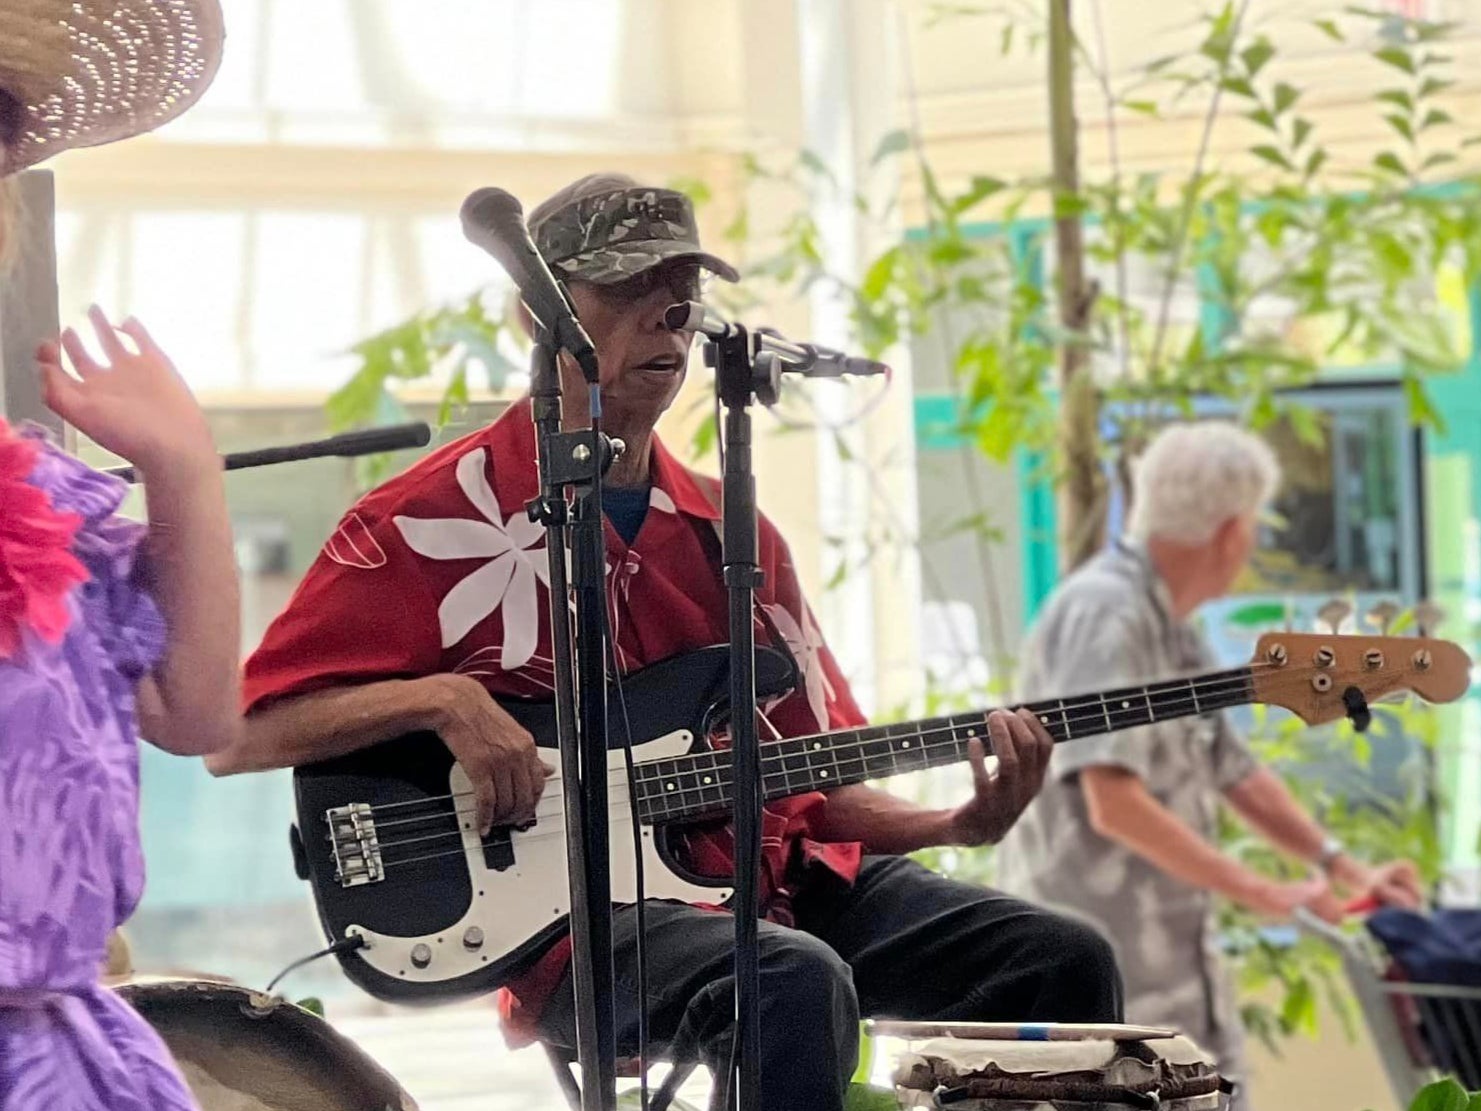 Buddy Jantoc, a musician in Lahaina, died in the Maui wildfires